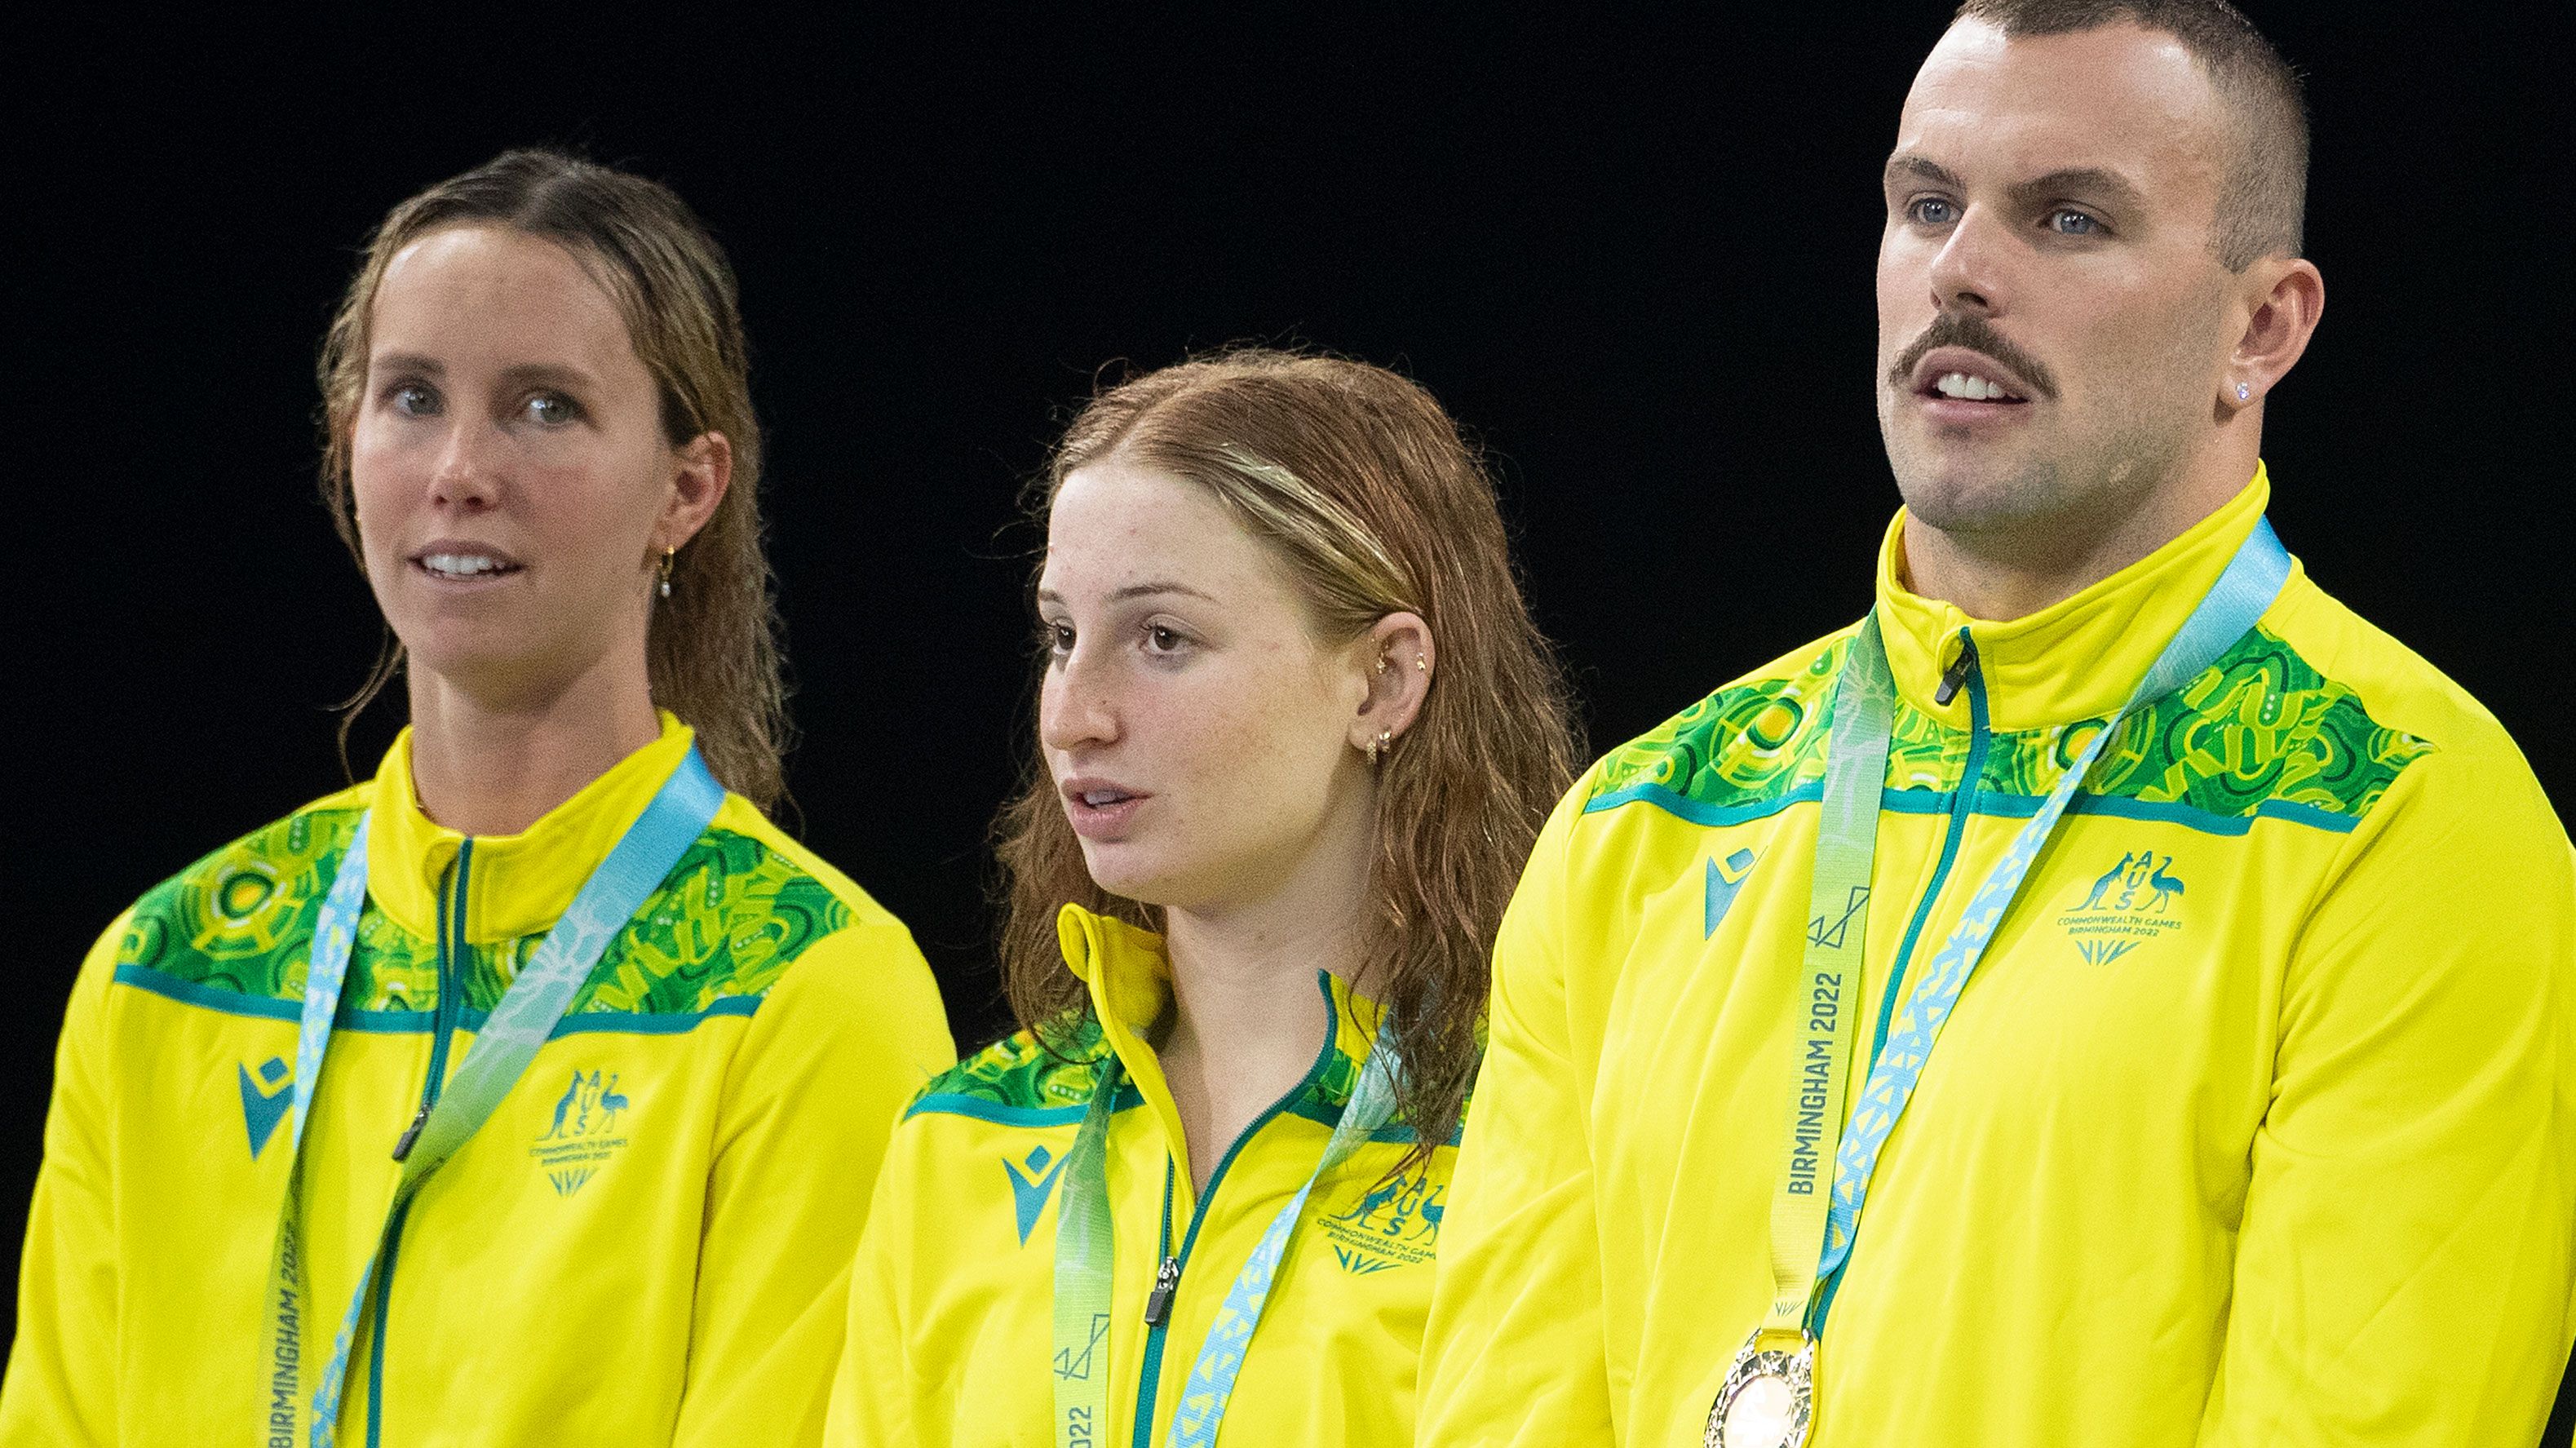 Emma McKeon (left) and Kyle Chalmers (right), are separated on the podium by Mollie O&#x27;Callaghan after winning the mixed 4x100m freestyle relay.